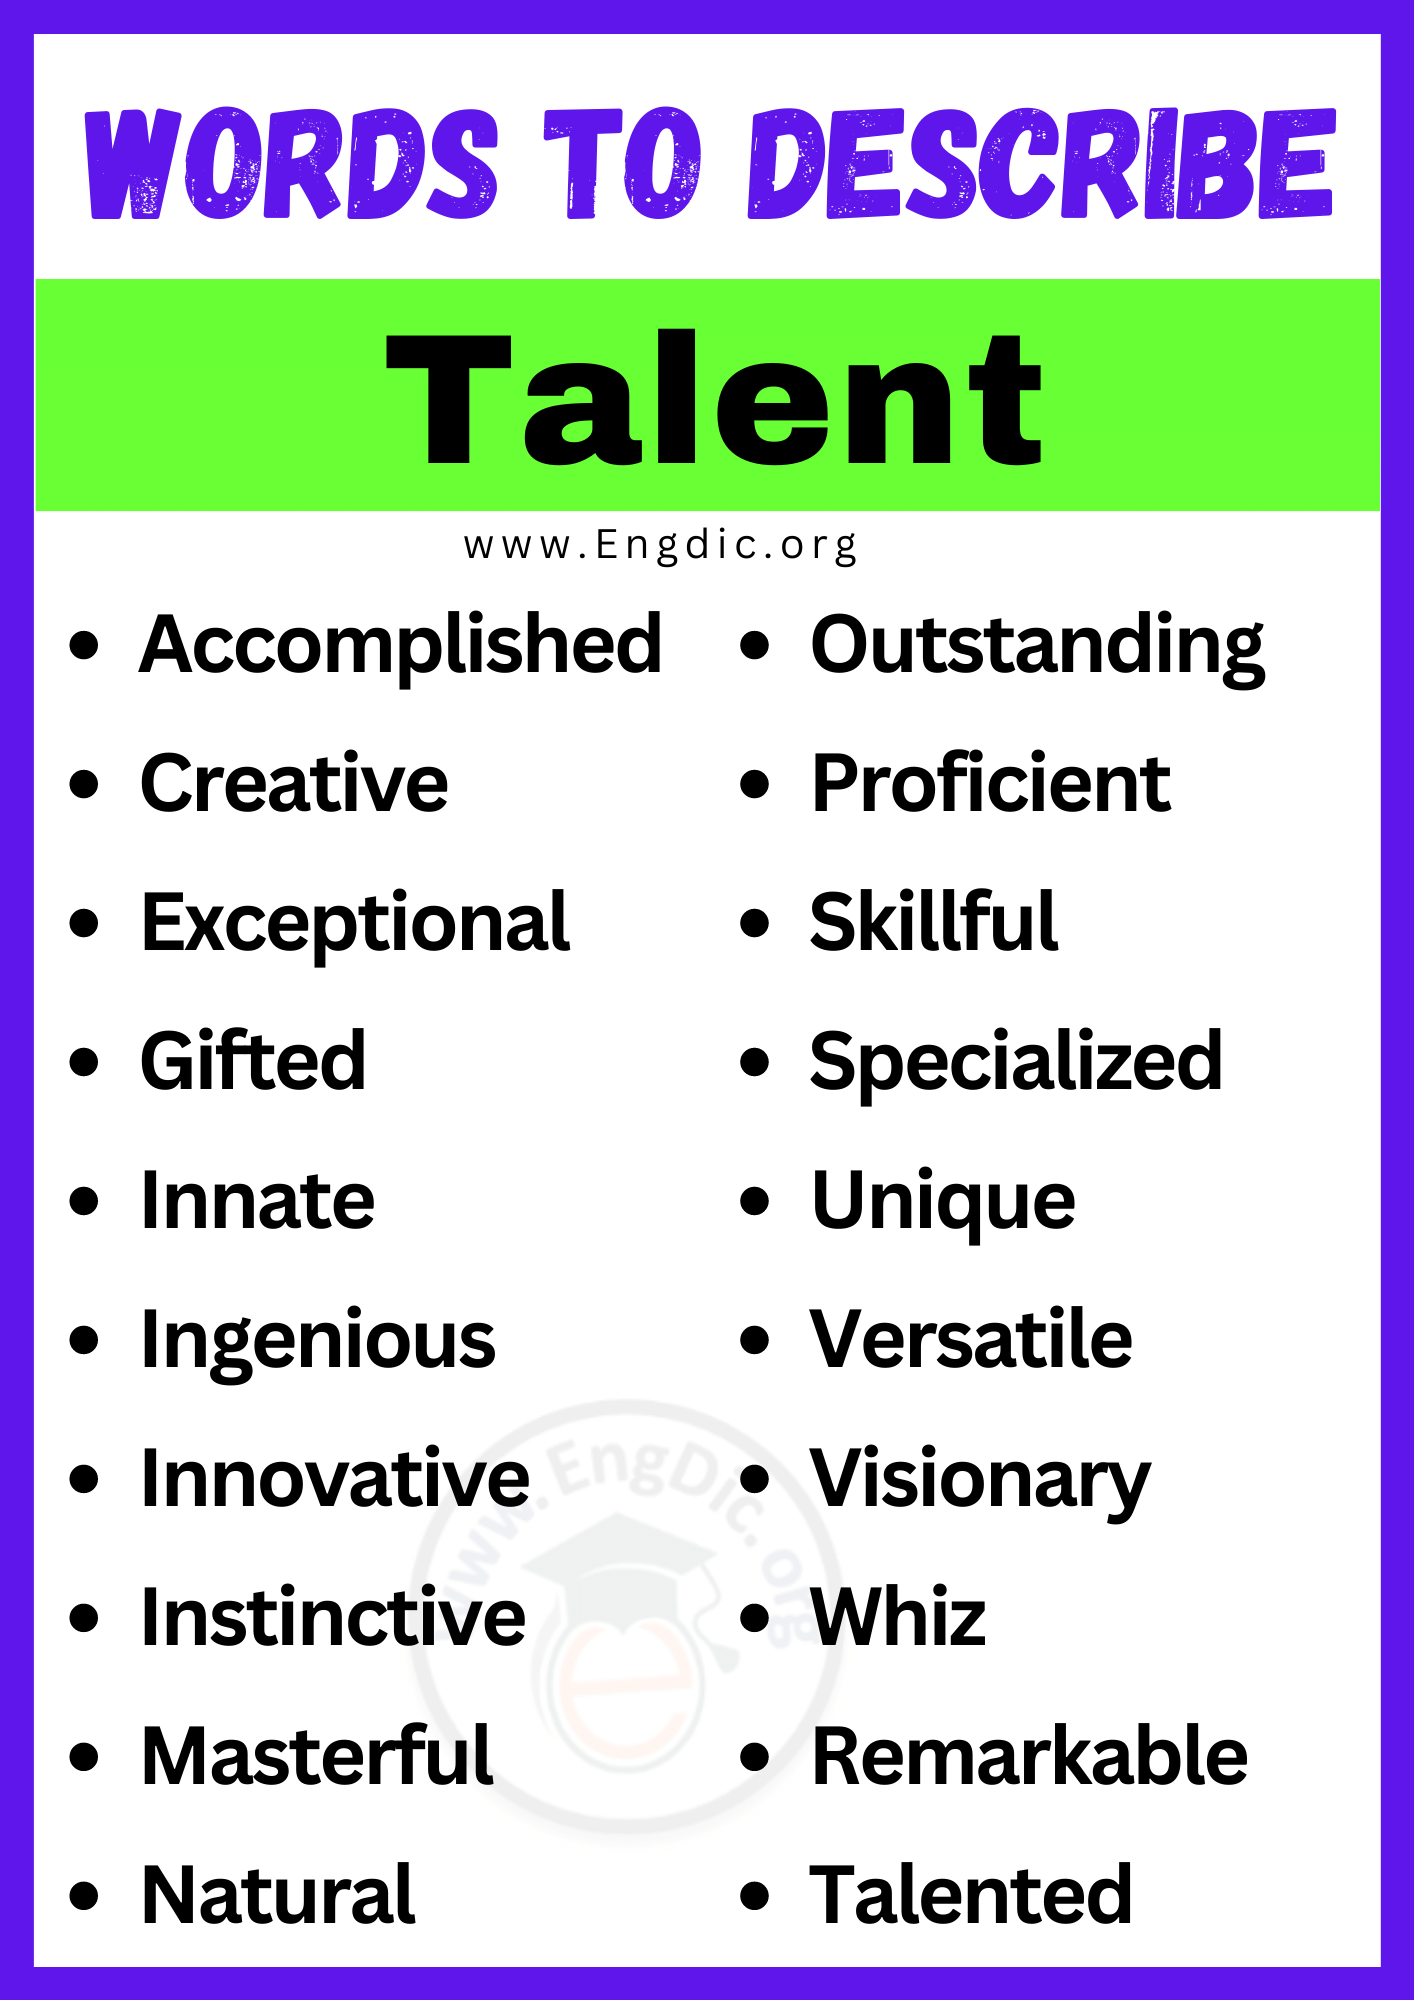 Words to Describe Talent